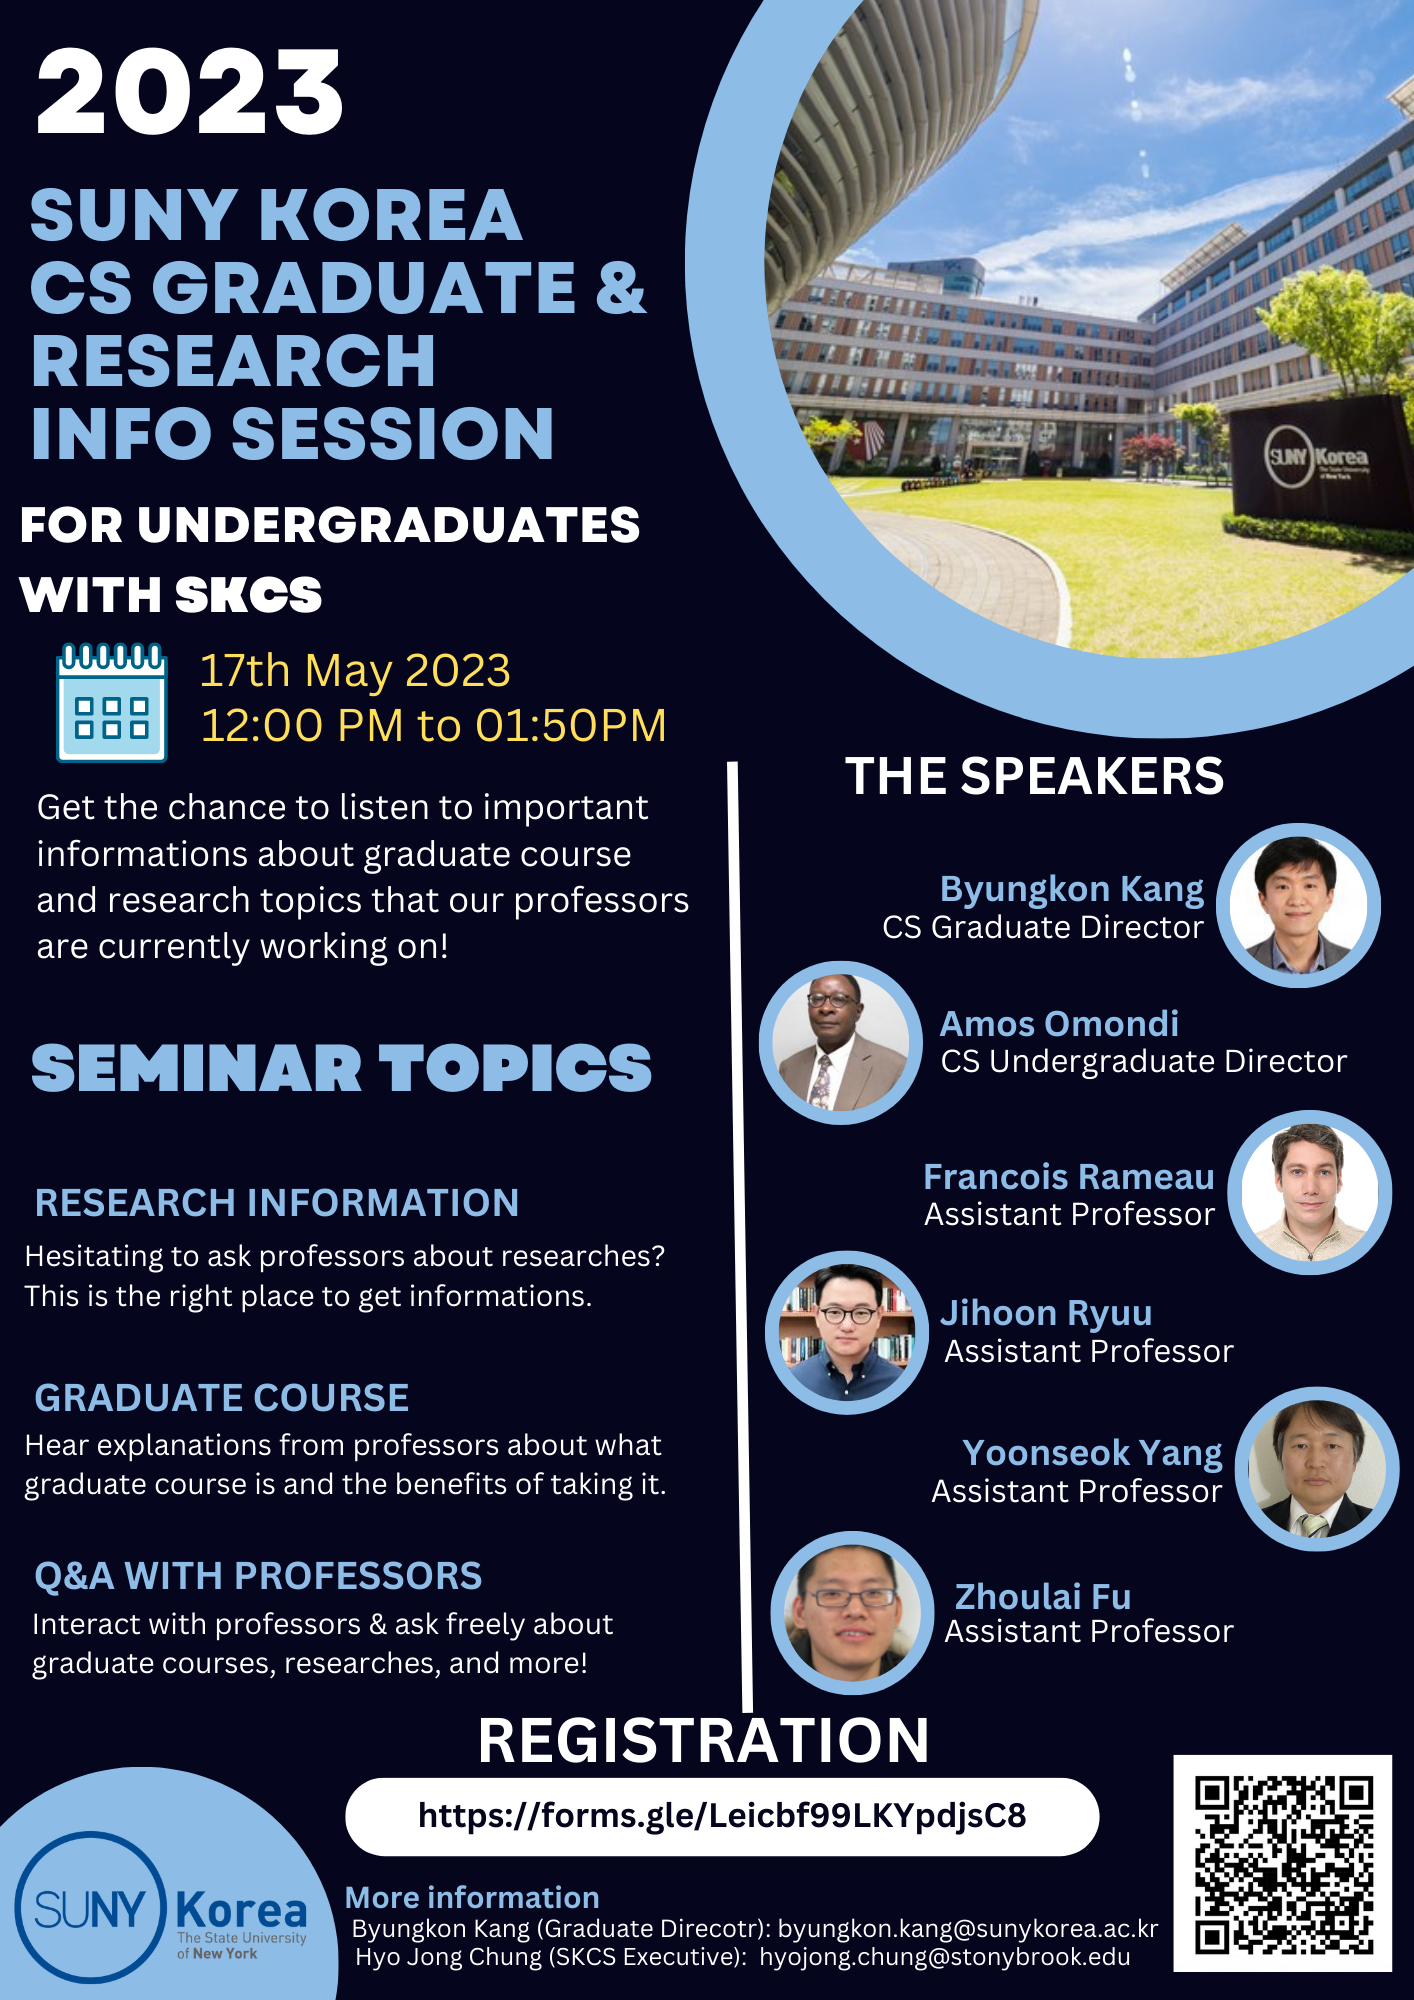 2023 SUNY KOREA CS GRADUATE & RESEARCH INFO SESSION FOR UNDERGRADUATES WITH SKCS 17th May 2023 12:00PM to 01:50PM Get the chance to listen to important informations about graduate course and research topics that our profrssors are currently working on! SEMINAR TOPICS RESEARCH INFORMATION Hesitating to ask professors about researches? This is the right place to get informations. GRADUATE COURSE Hear explanations from professors about what graduate course is  and the benefits of taking it. Q&A WITH PROFESSORS Interact with professors & ask freely about graduate courses, researches, and more! THE SPEAKERS Byungkon Kang CS Graduate Director, Amos Omondi CS Undergraduate Director, Francois Rameau Assistant Professor Jihoon Ryuu Assistant Professor, Yoonseok Yang Assistant Professor, Zhoulai Fu Assistant Professor. REGISTRARTION https://forms.gle/Leicbf99LKYpdjsC8 / More information: Byungkon Kang(Graduate Direcotr): byungkon.kang@sunykorea.ac.kr Hyo Jong Chung(SKCS Executive): hyojong.chung@stonybrook.edu / QR(https://docs.google.com/forms/d/e/1FAIpQLSc3AHEHGSyvXKKr5jRgcWl0jYw7pm11BqhCmhJj7yTLwlIWOA/closedform) SUNY Korea The State University of New York